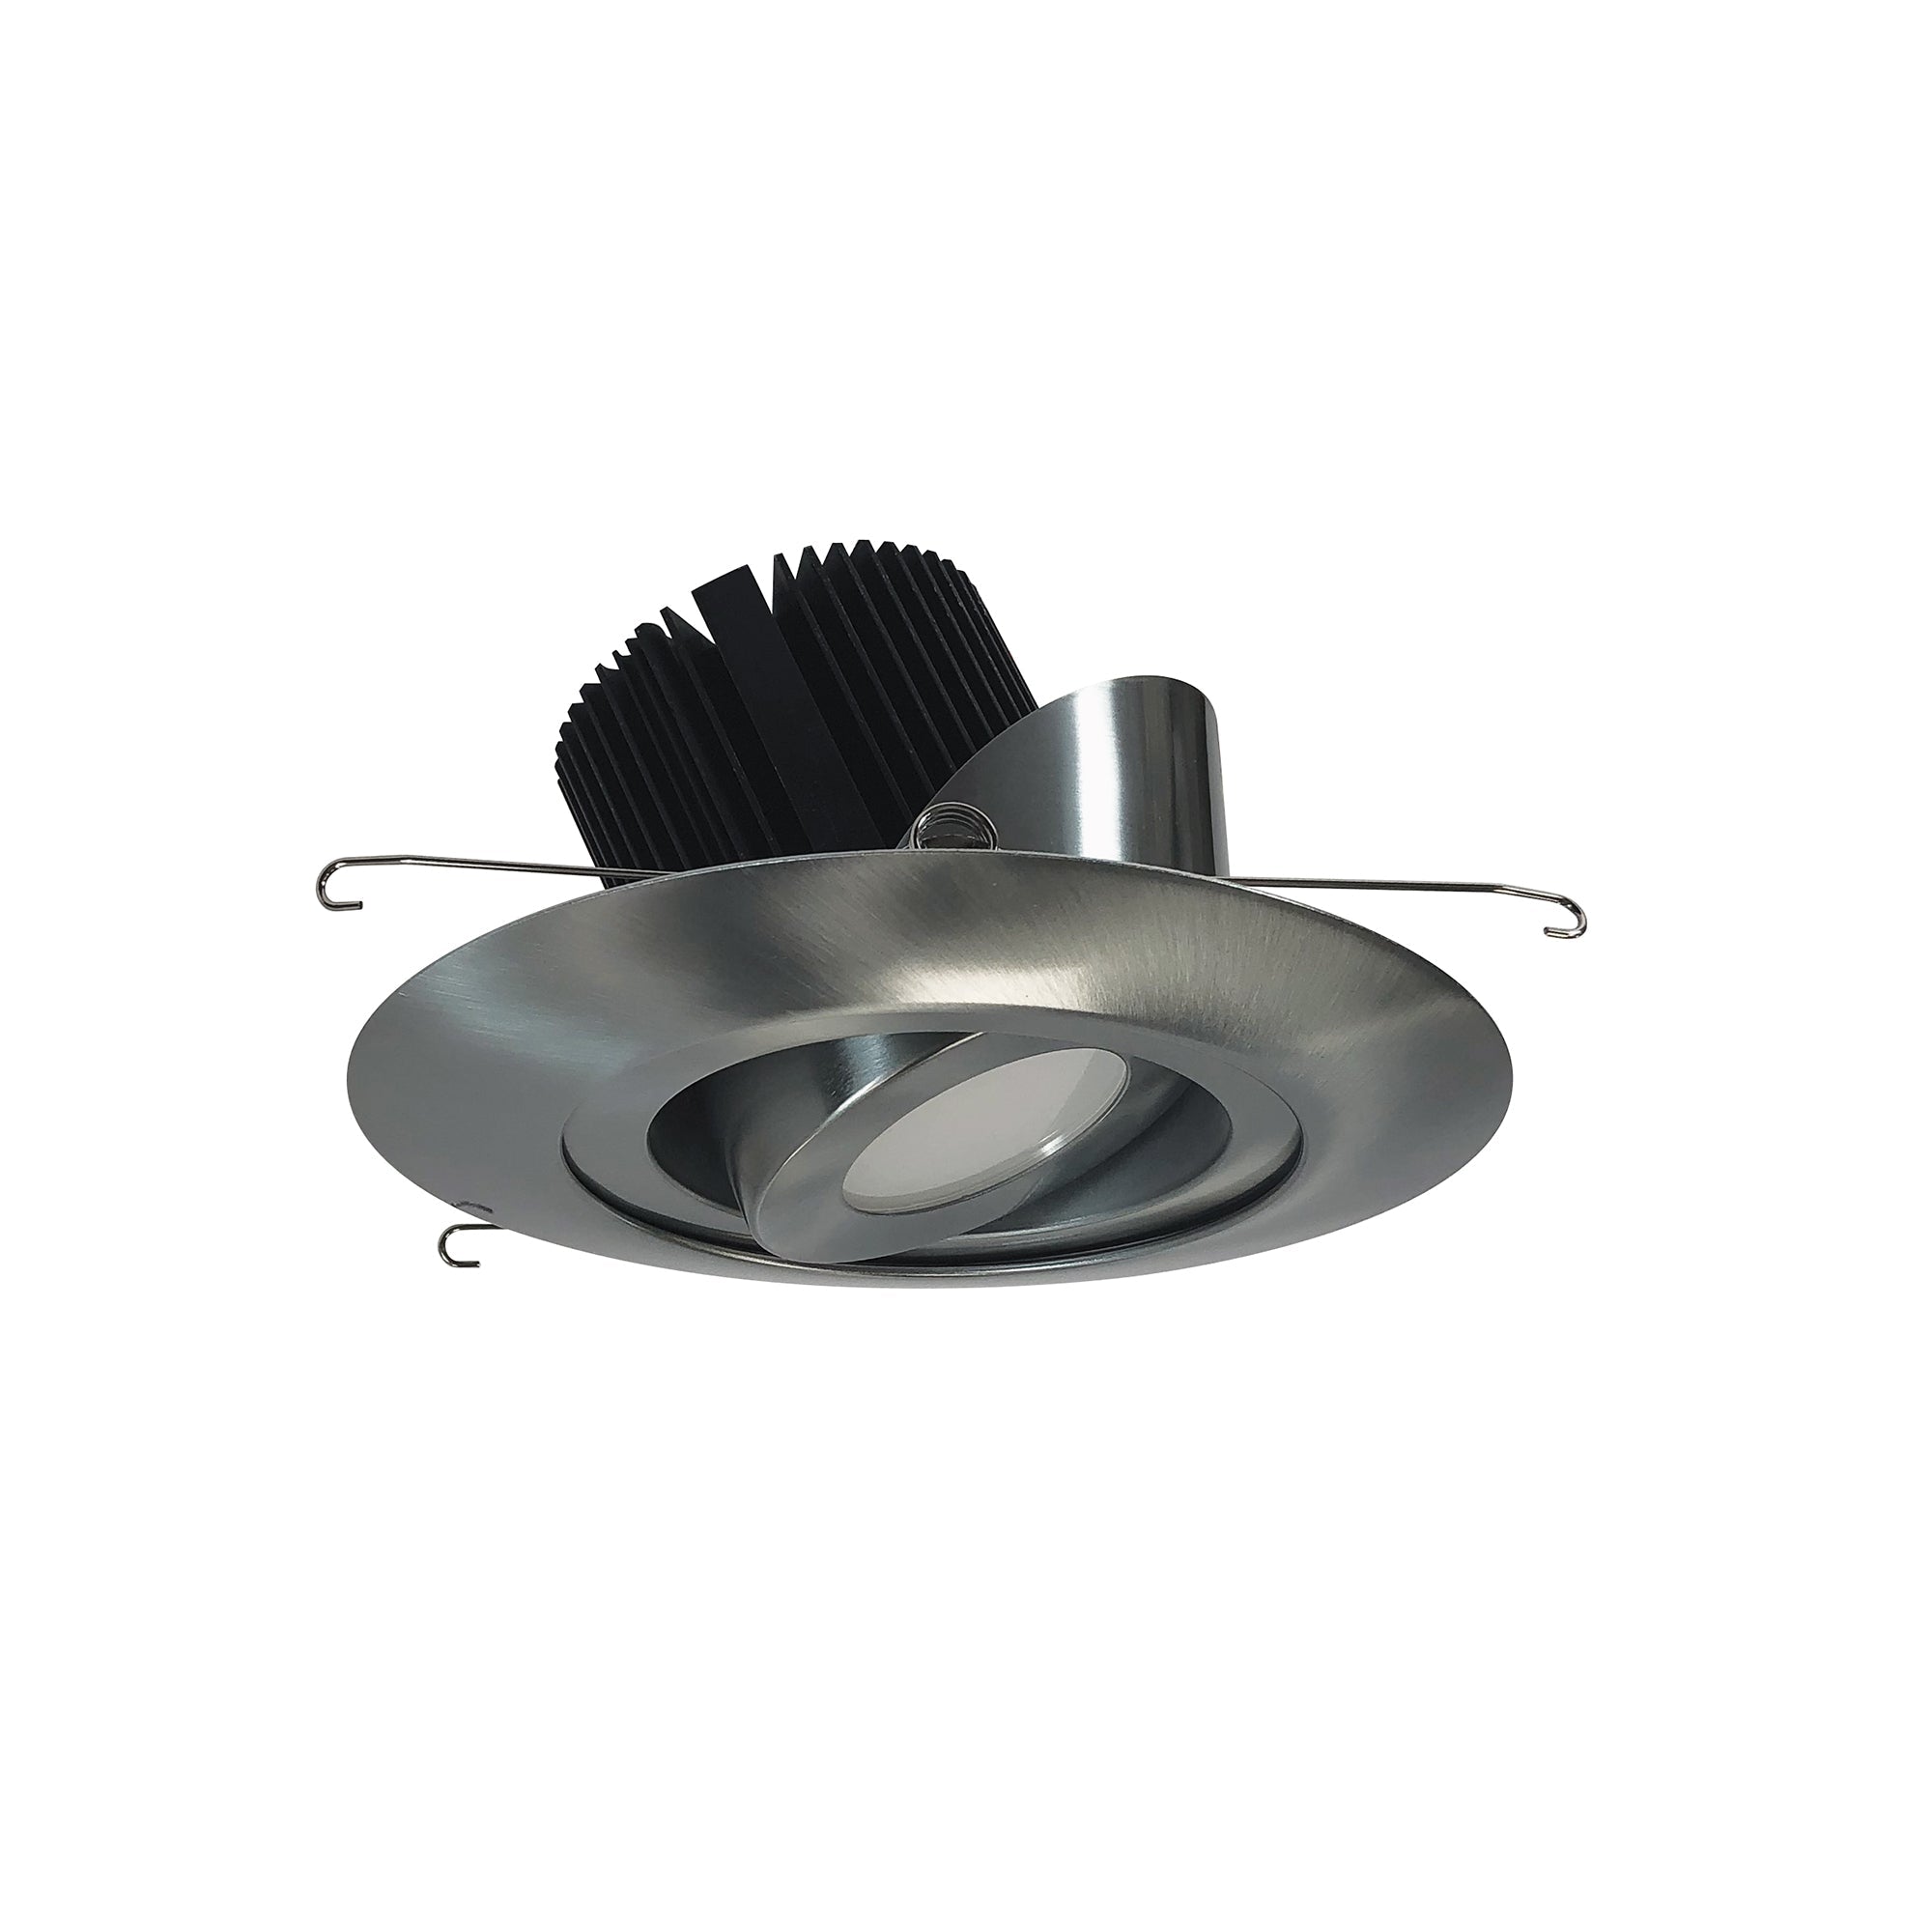 Nora Lighting NRM2-614L2530FNN - Recessed - 6 Inch Marquise II Round Surface Adjustable Trim, Flood, 2500lm, 3000K, Natural Metal (Not Compatible with NHRM2-625 Housings)